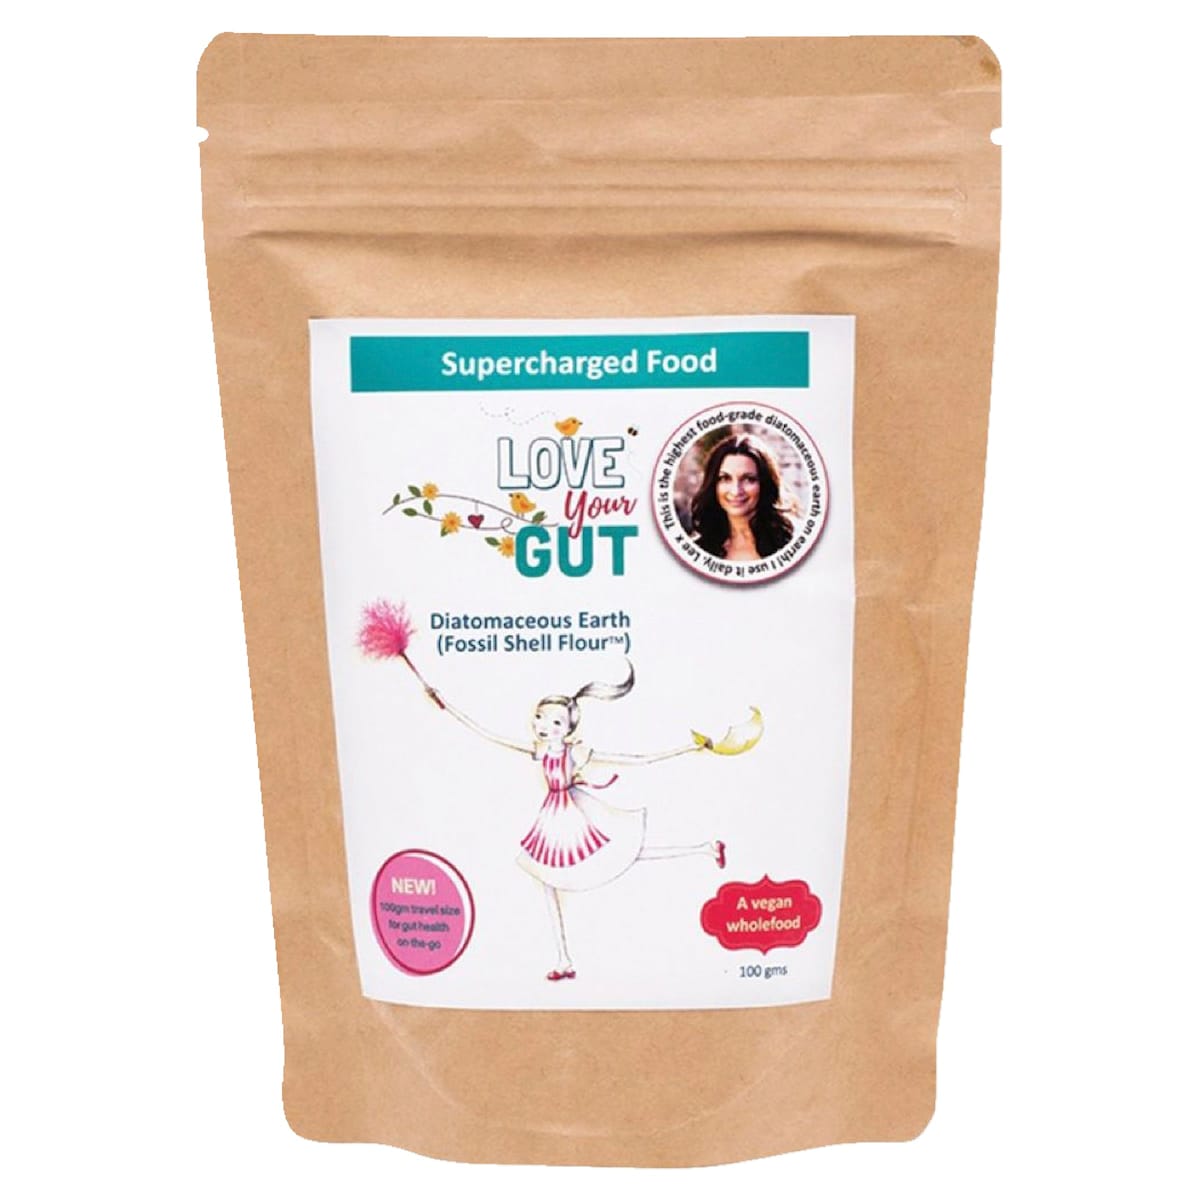 Supercharged Food Love Your Gut Powder Diatomaceous Earth 100g Australia